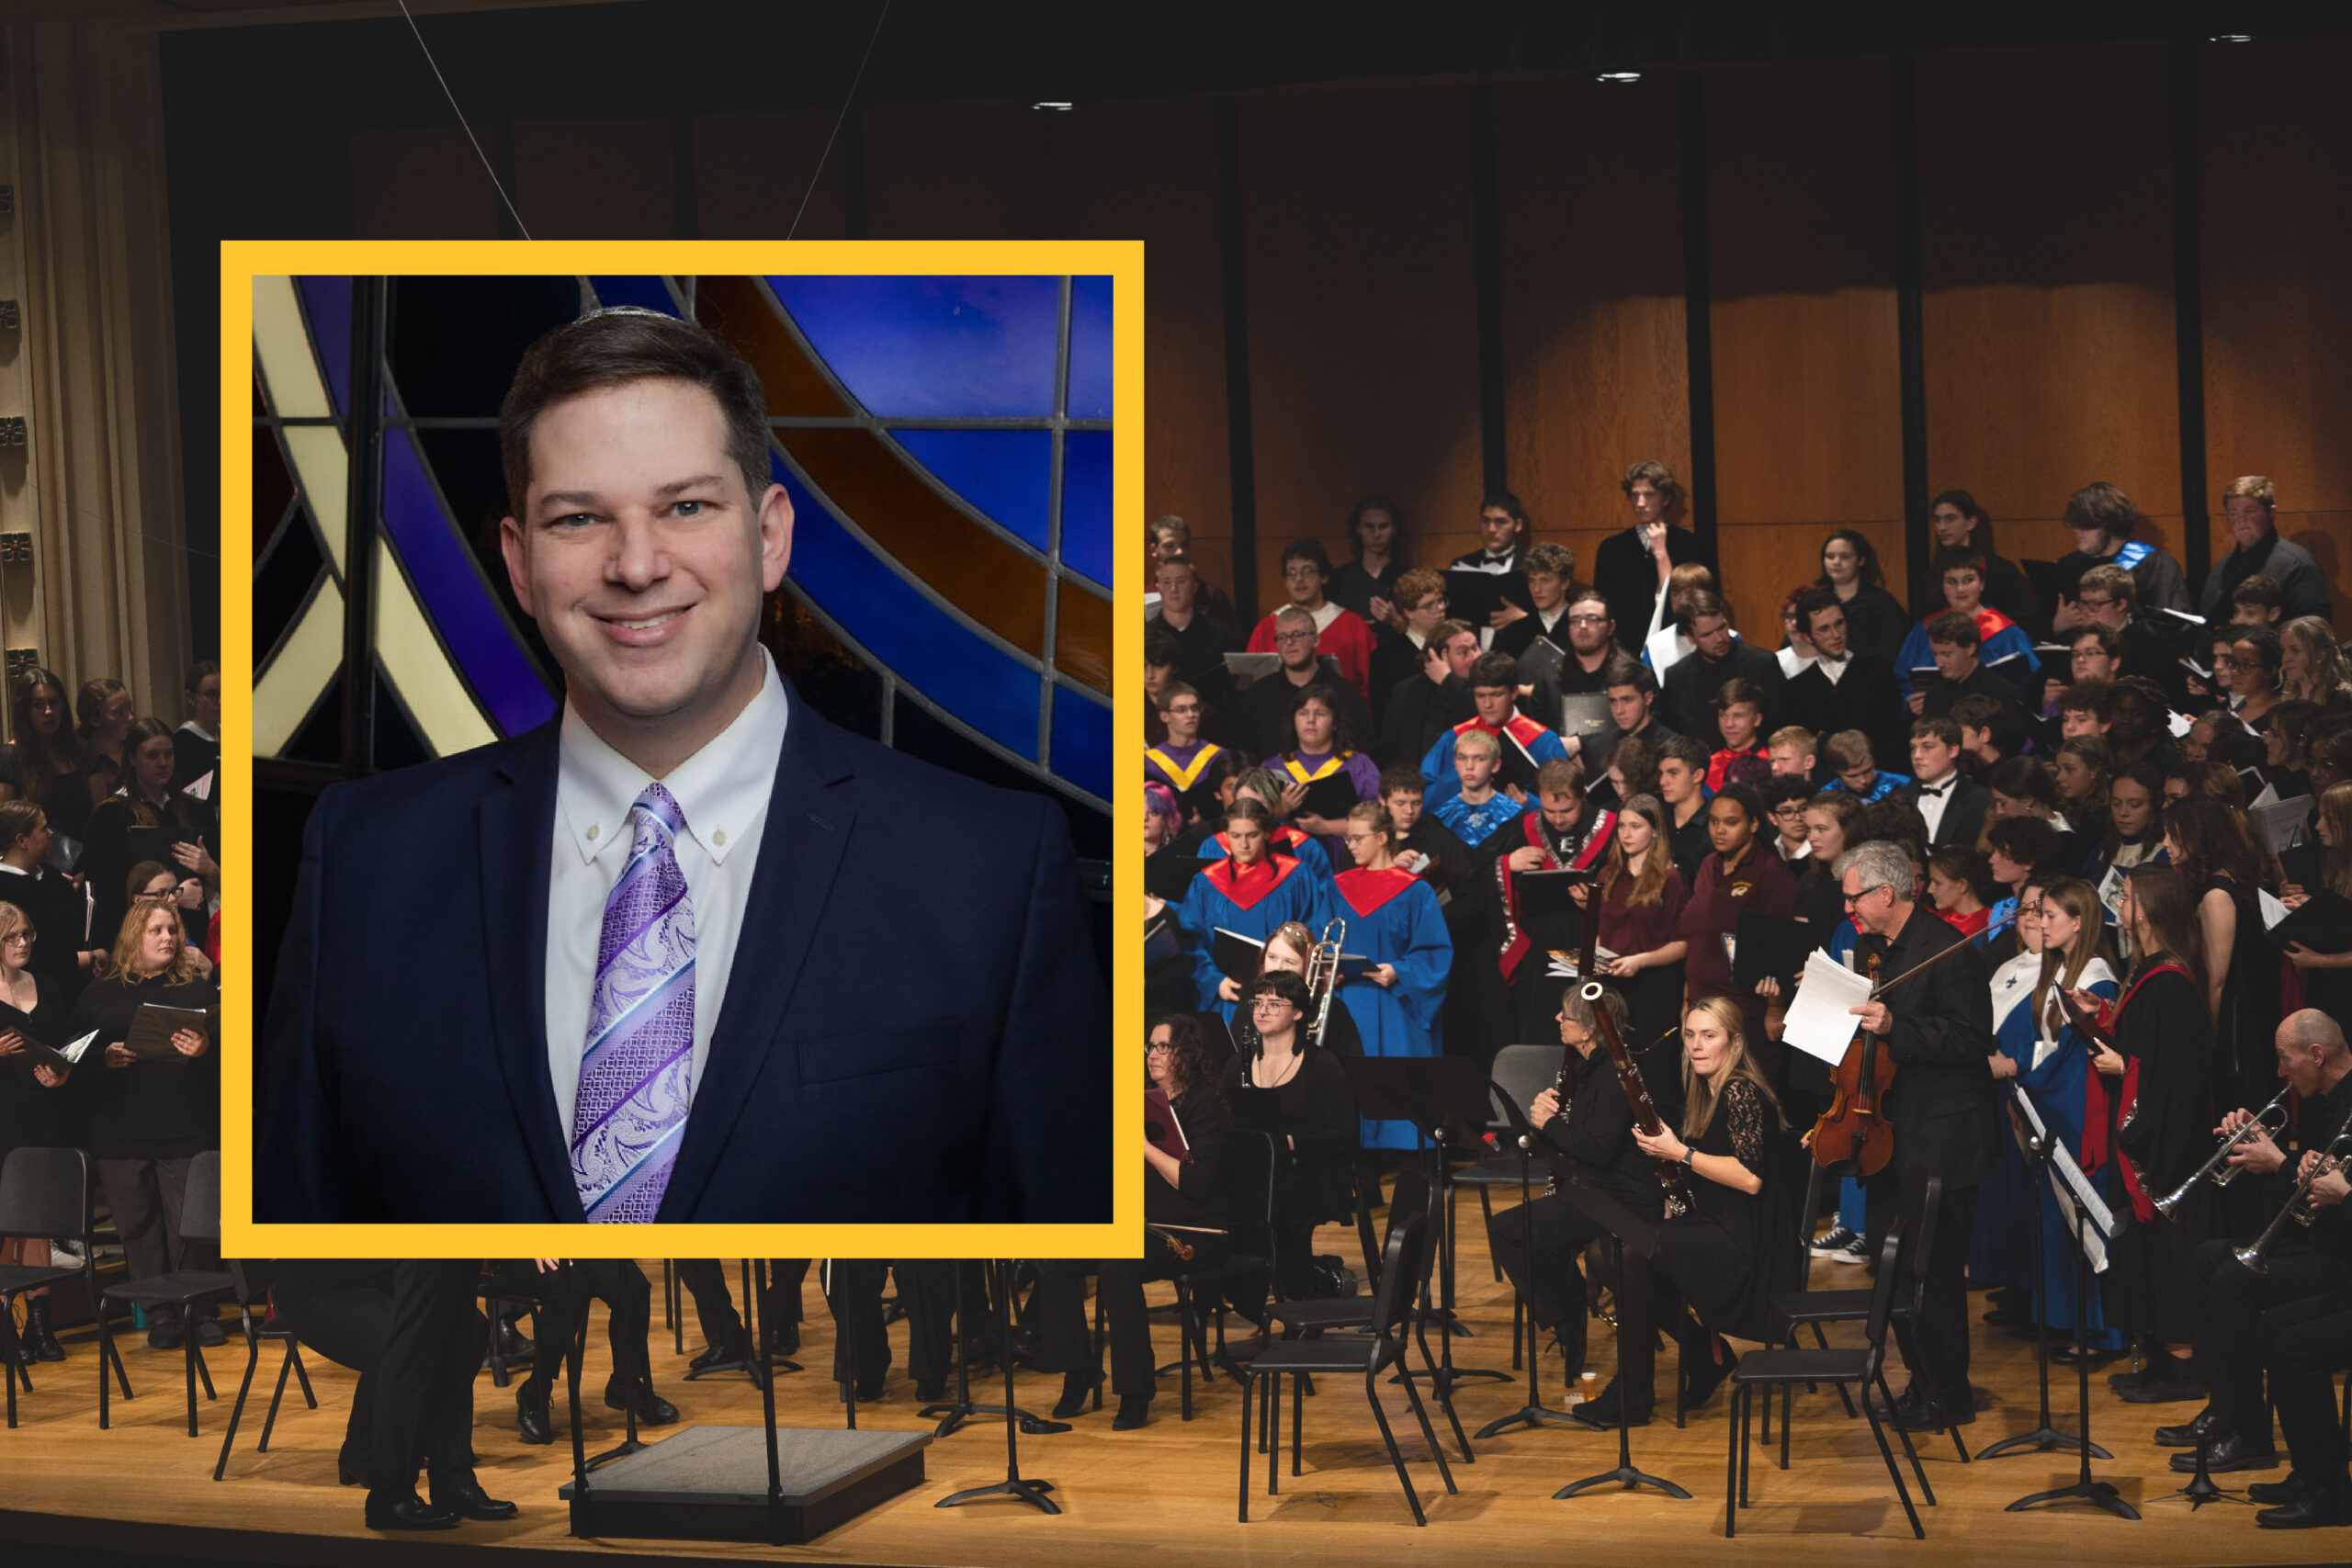 Dan Singer, an alumnus of the UW-Superior Music Department shares his personal story and connection to this crossroad together with UW-Superior faculty